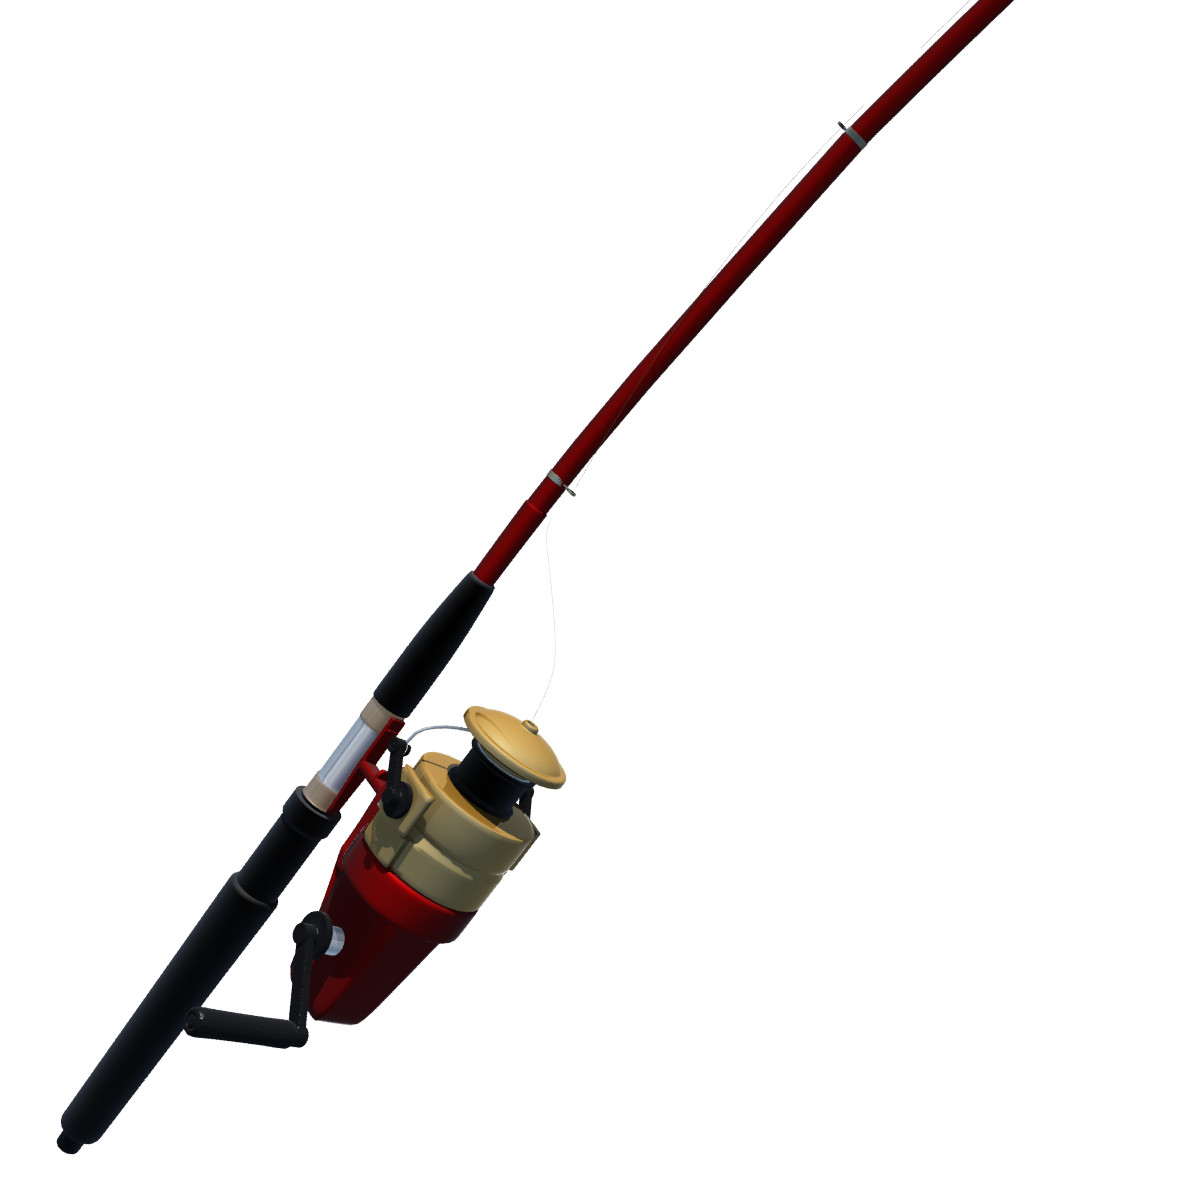 Searched 3d models for Pocket Fishing Rod